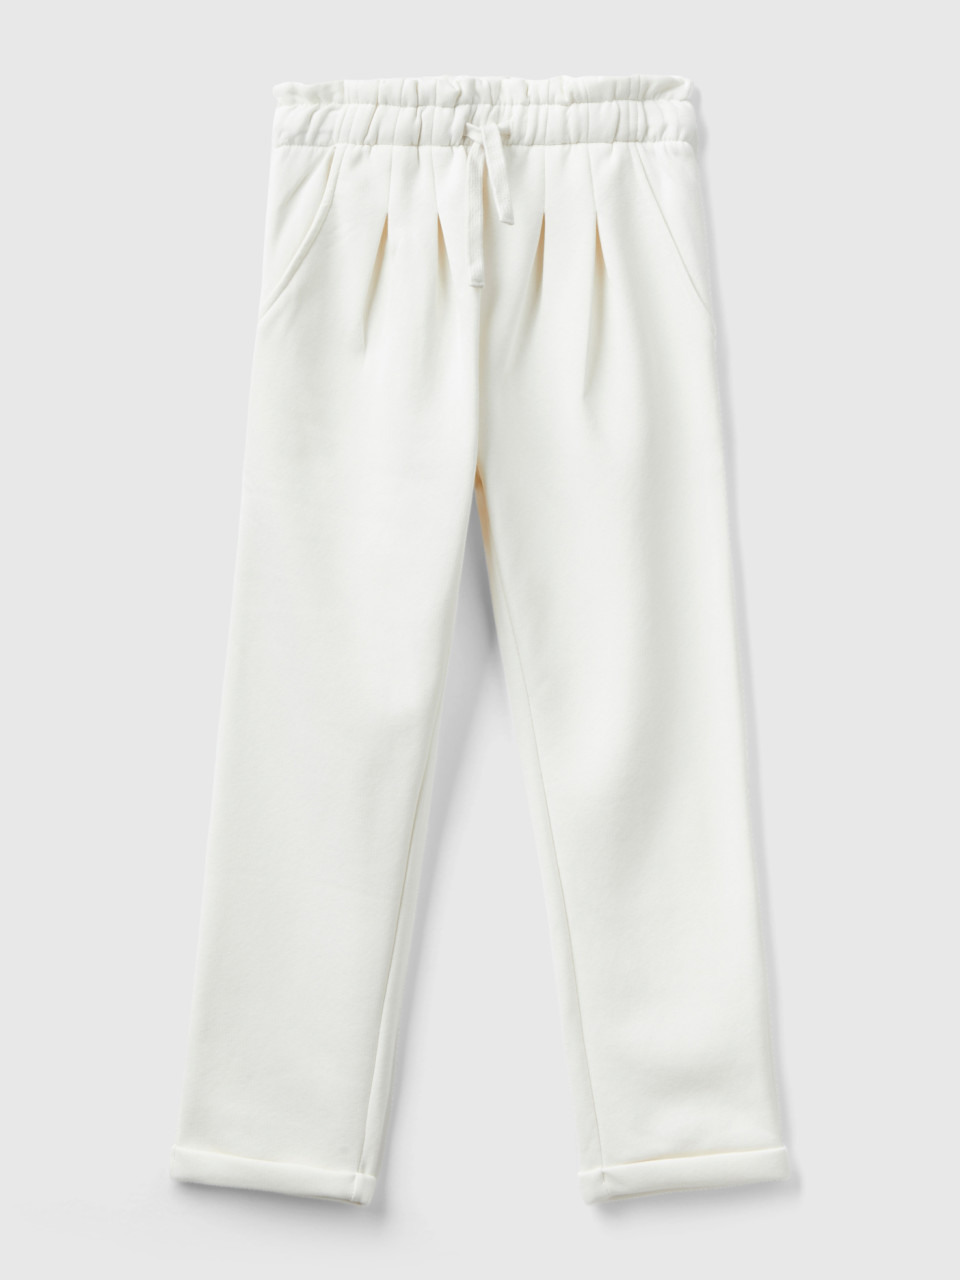 Benetton, Paperbag Trousers In Warm Sweat Fabric, Creamy White, Kids